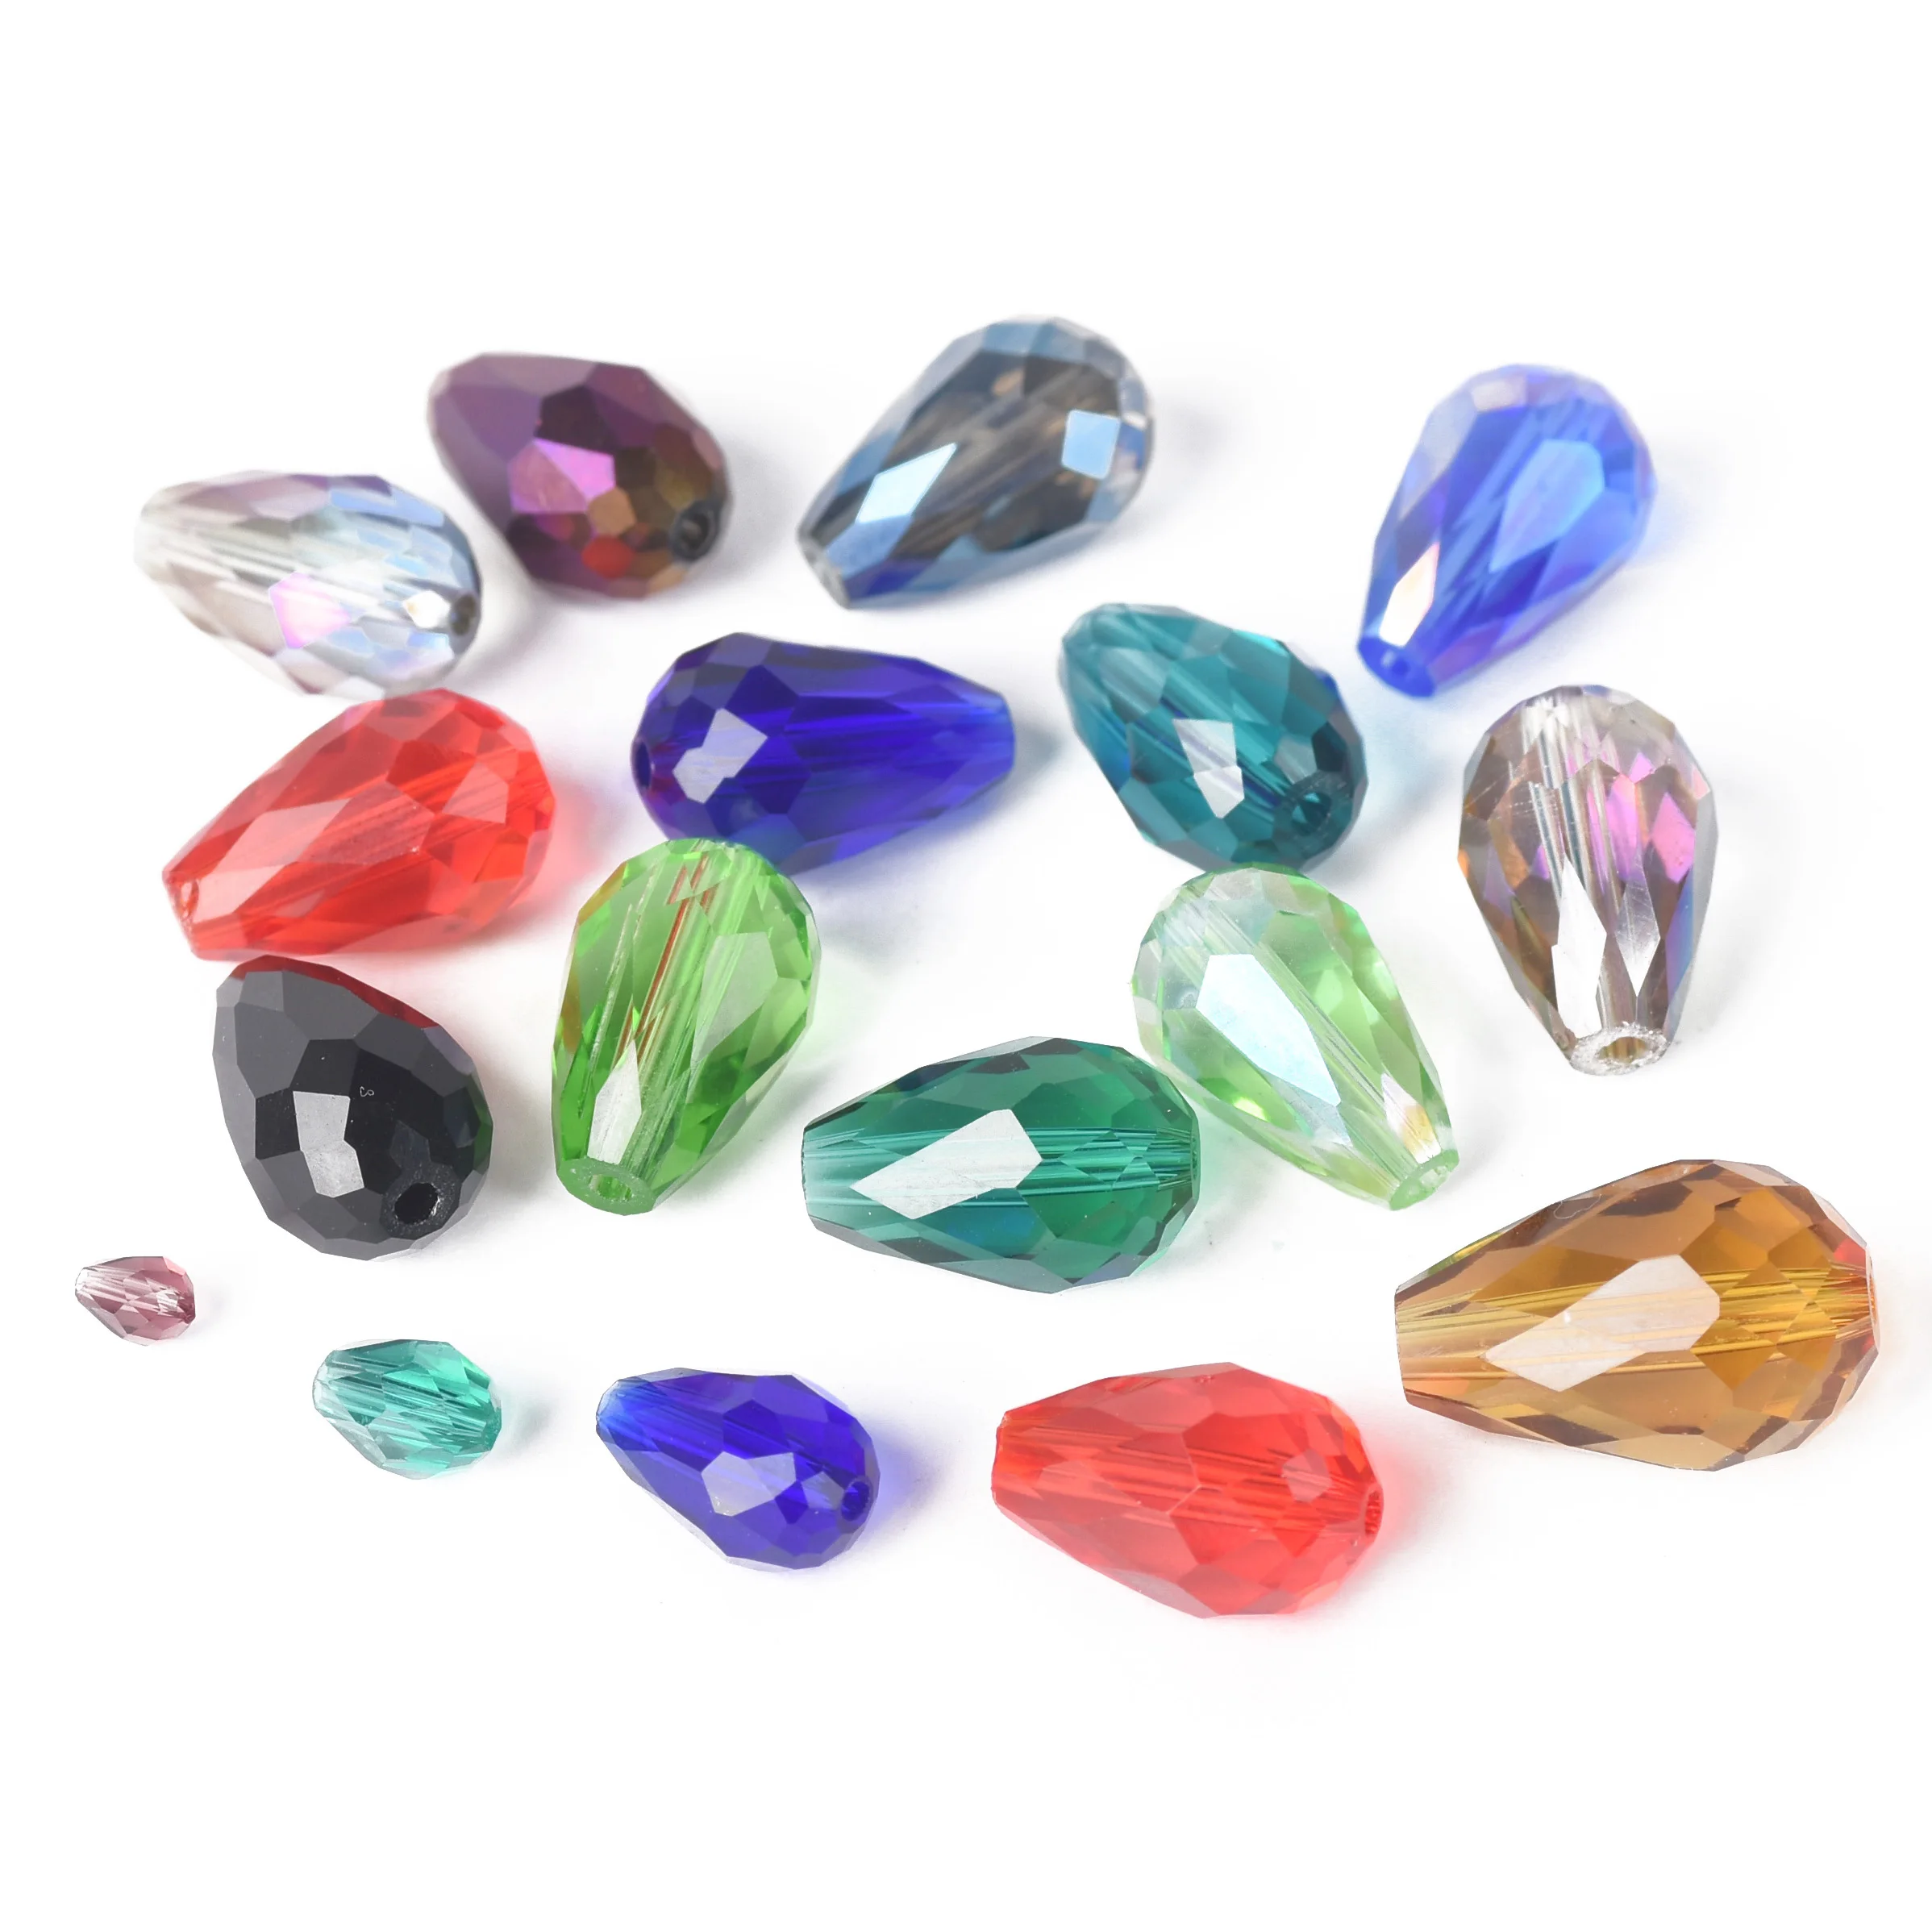 Teardrop Pear Shape Faceted Crystal Glass 5x3mm 7x5mm 12x8mm 15x10mm 18x12mm Loose Crafts Beads for Jewelry Making DIY